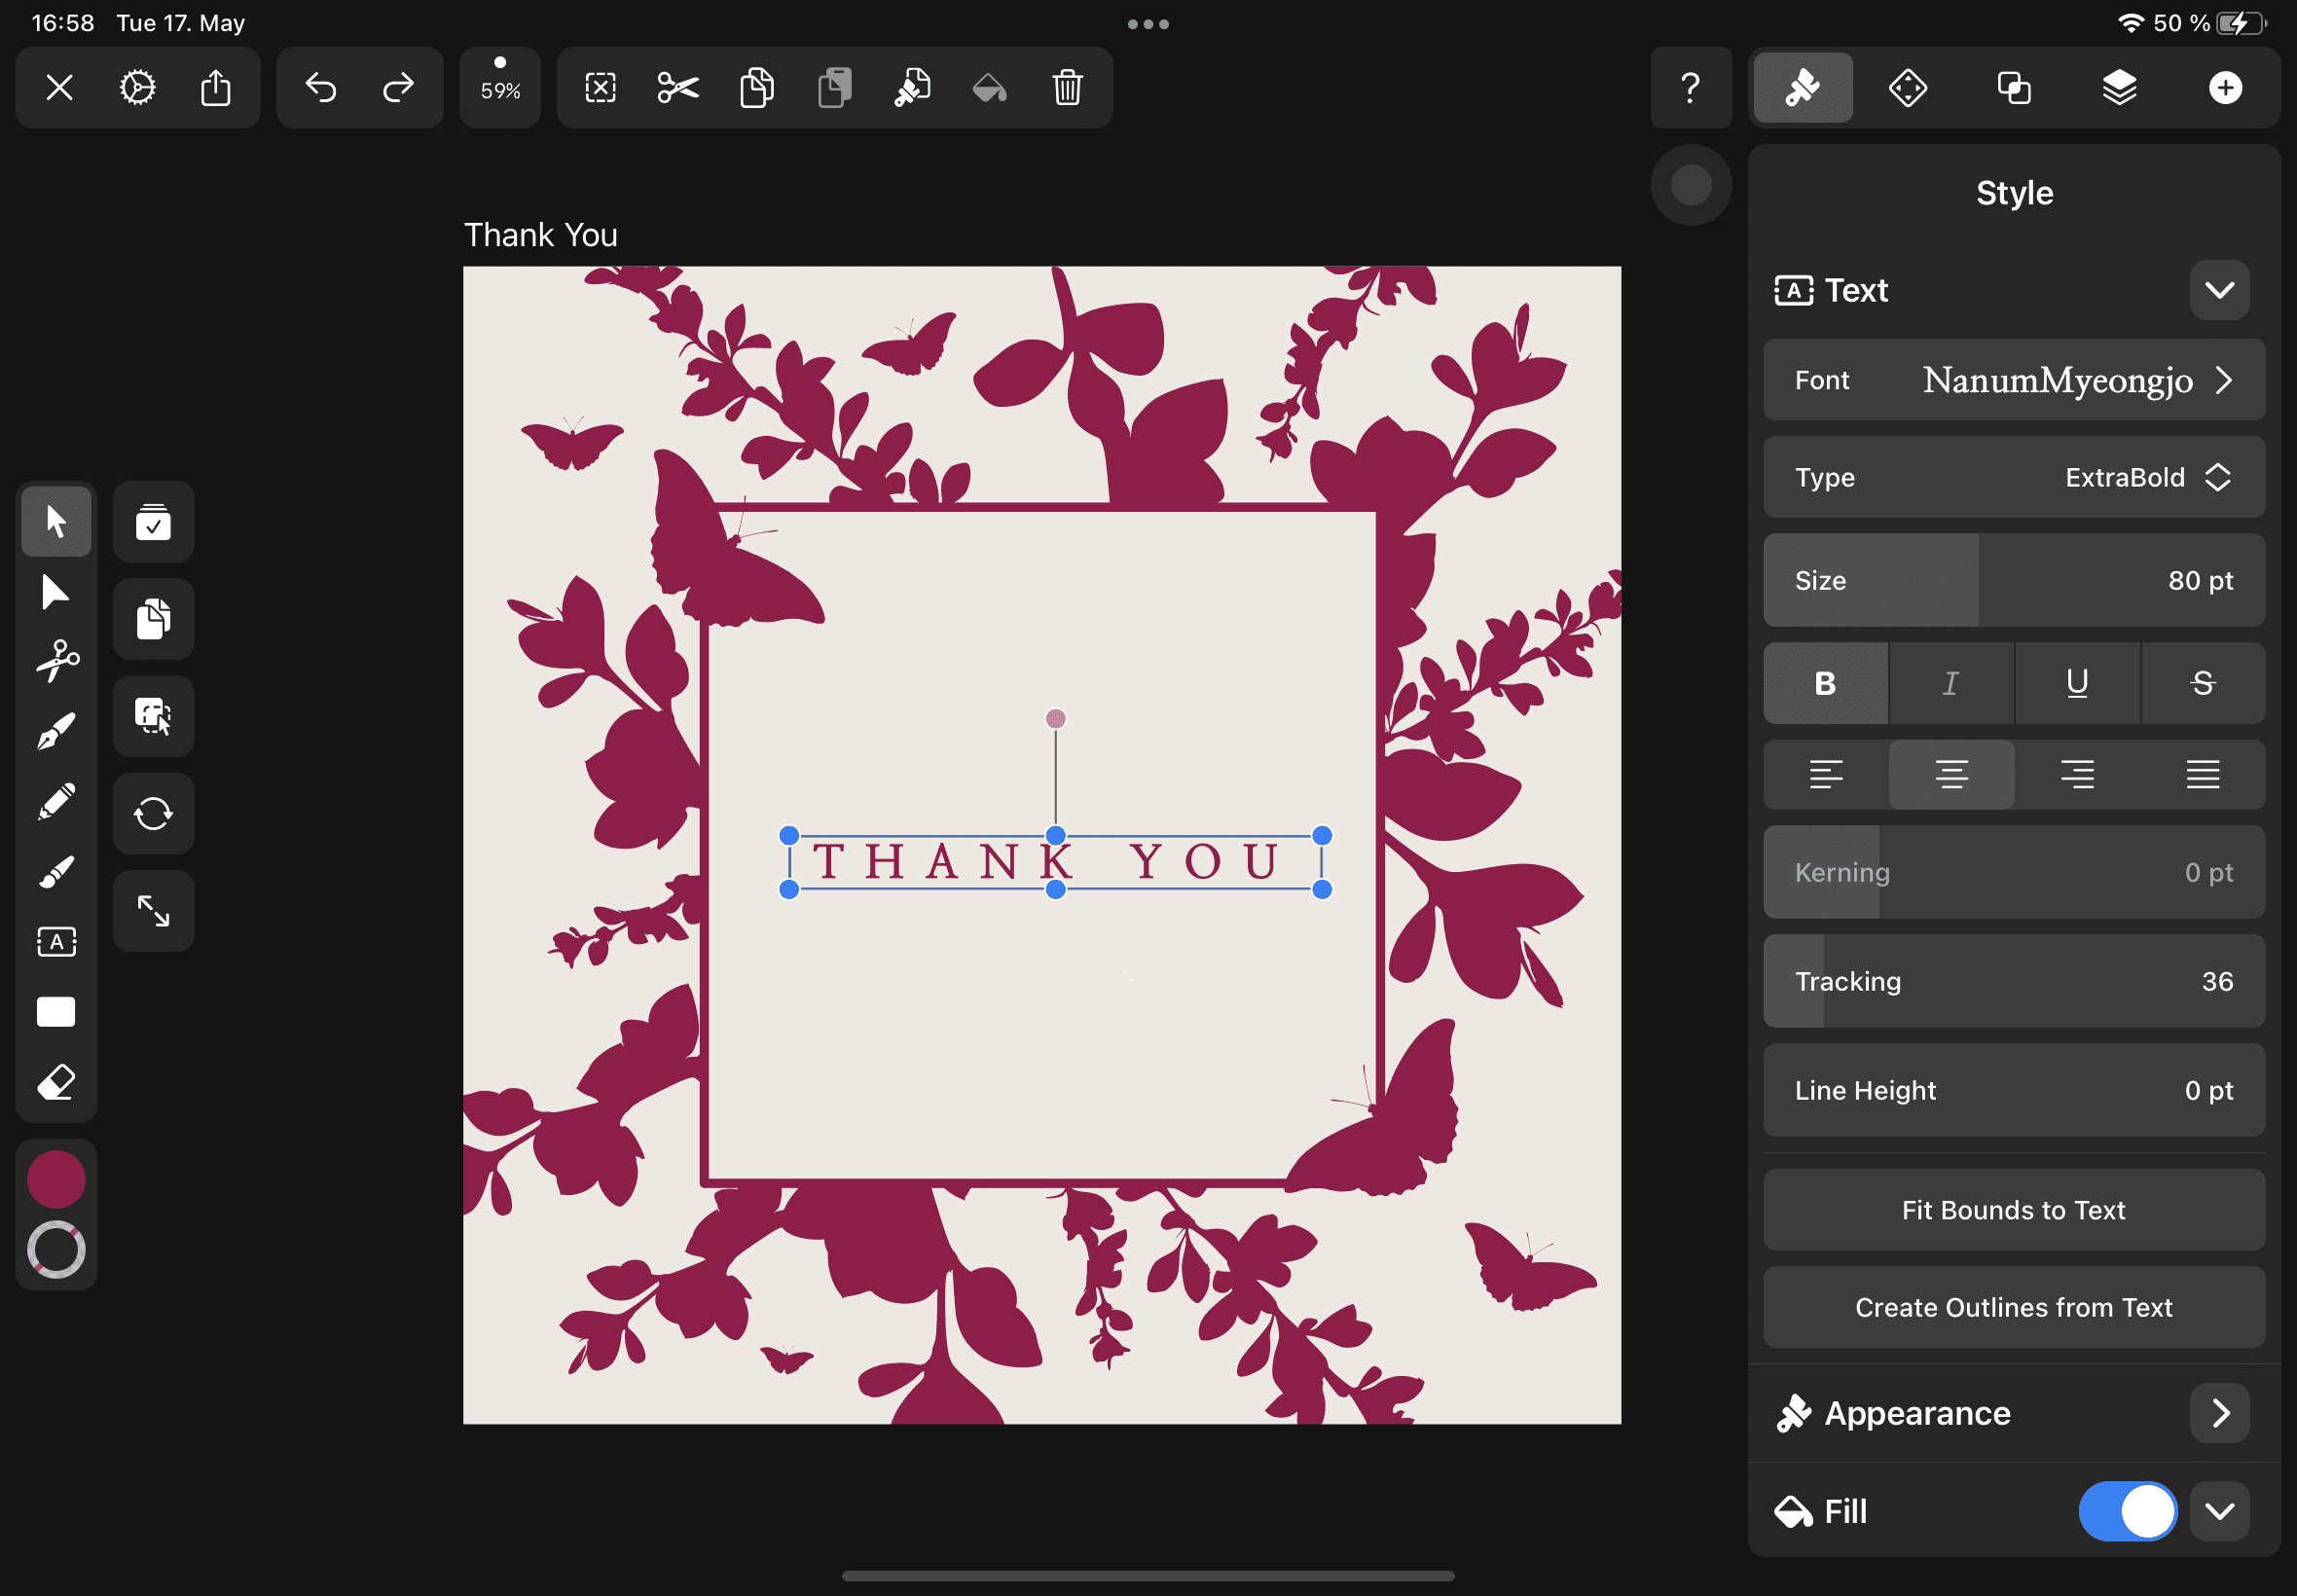 Graphic design interface with dark pink flower and butterfly images